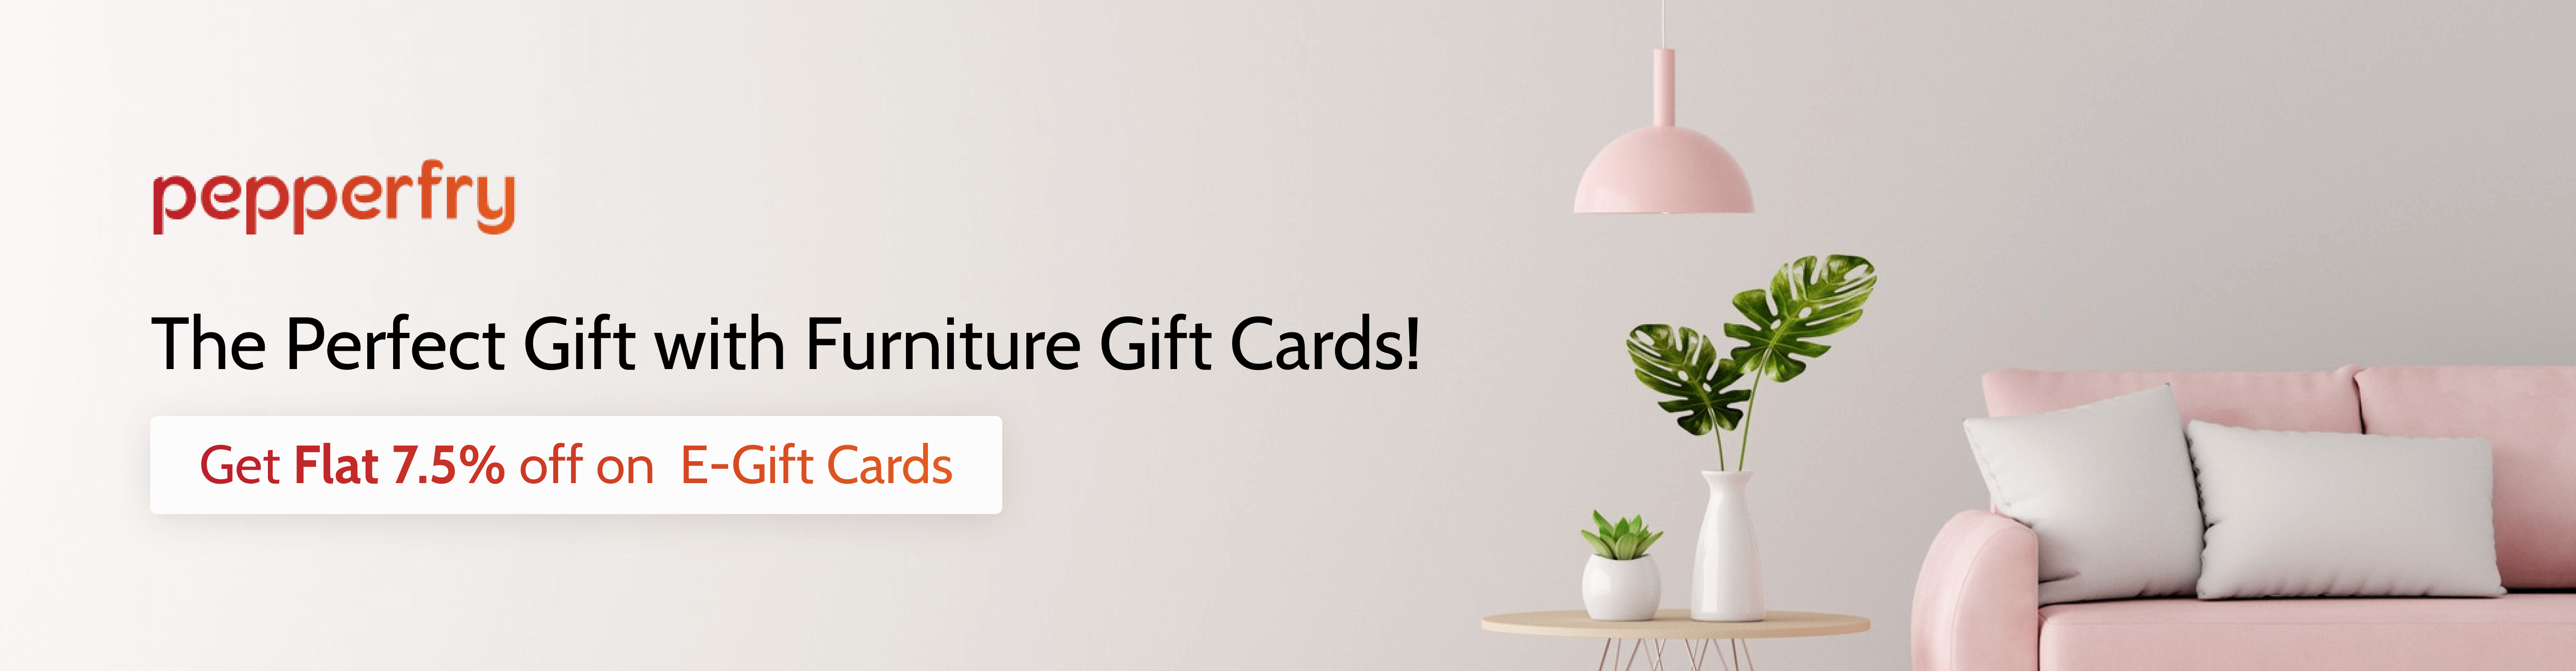 Does MATCHESFASHION accept gift cards or e-gift cards? — Knoji